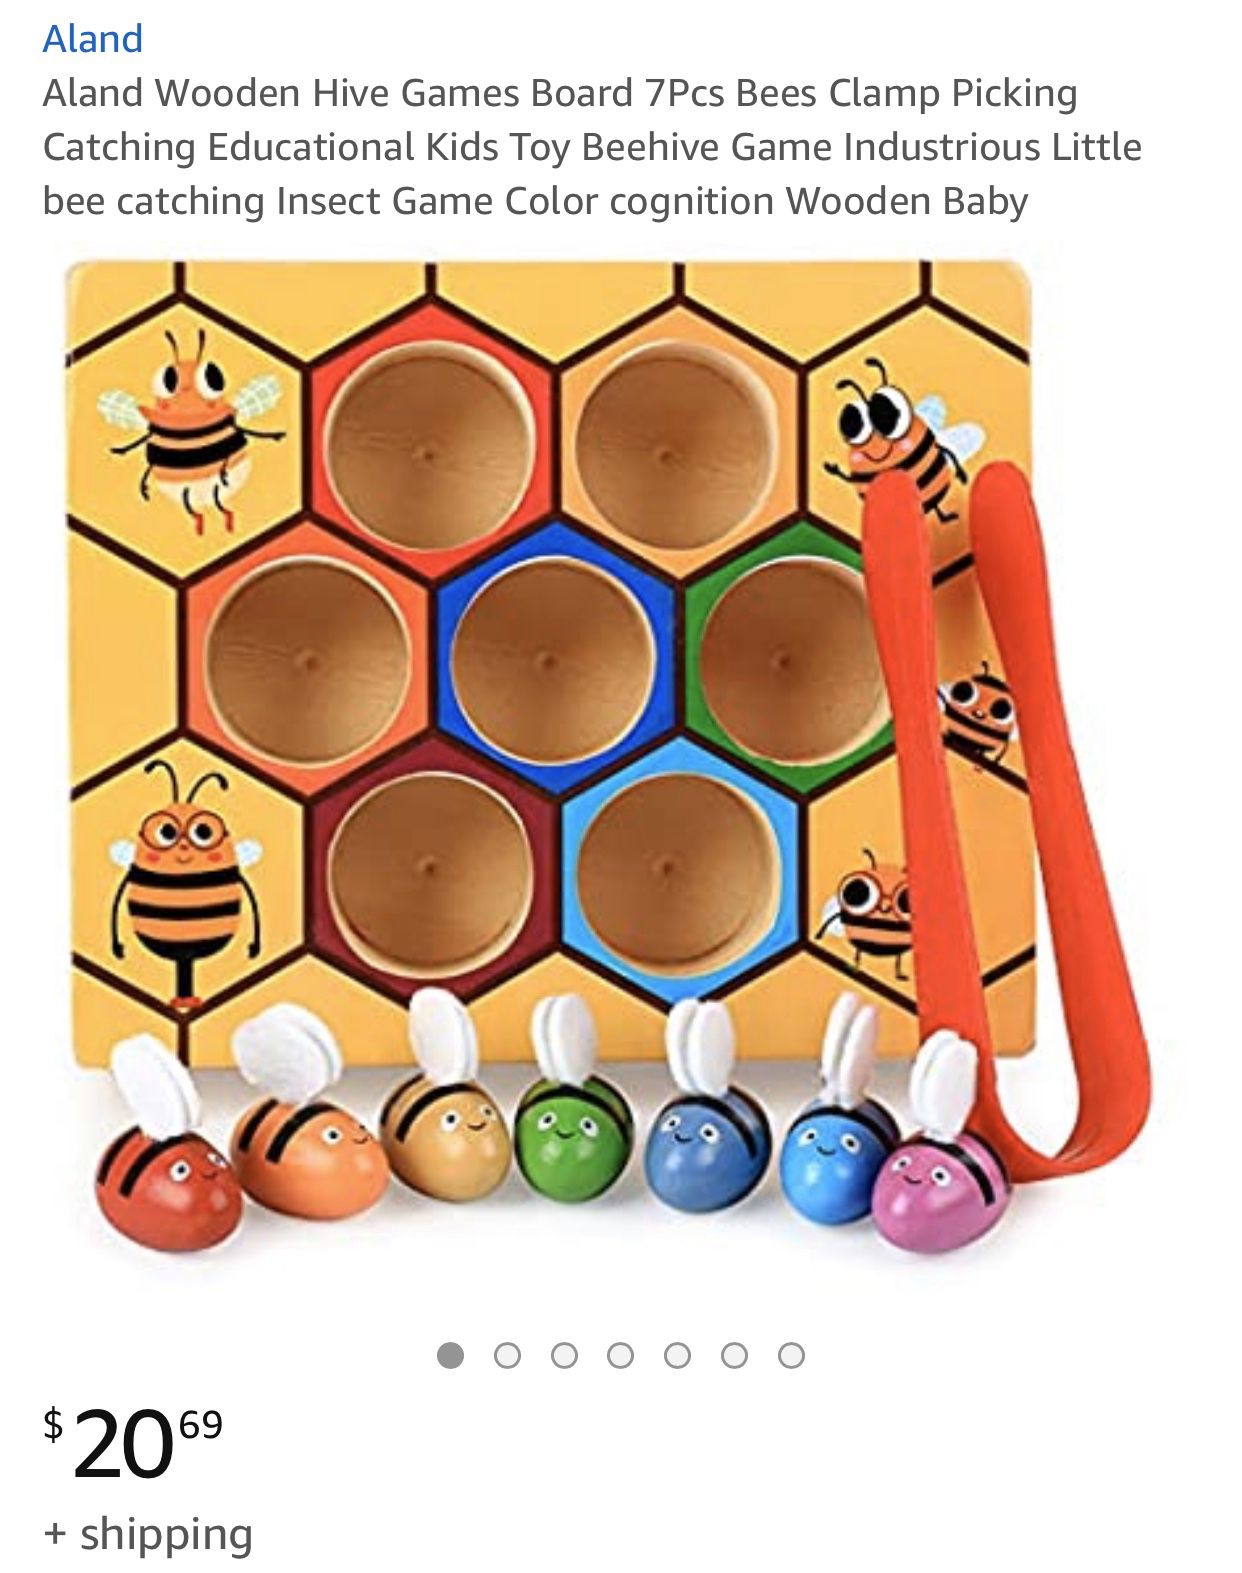 Aland Wooden Hive Games Board 7Pcs Bees Clamp Picking Catching Educati